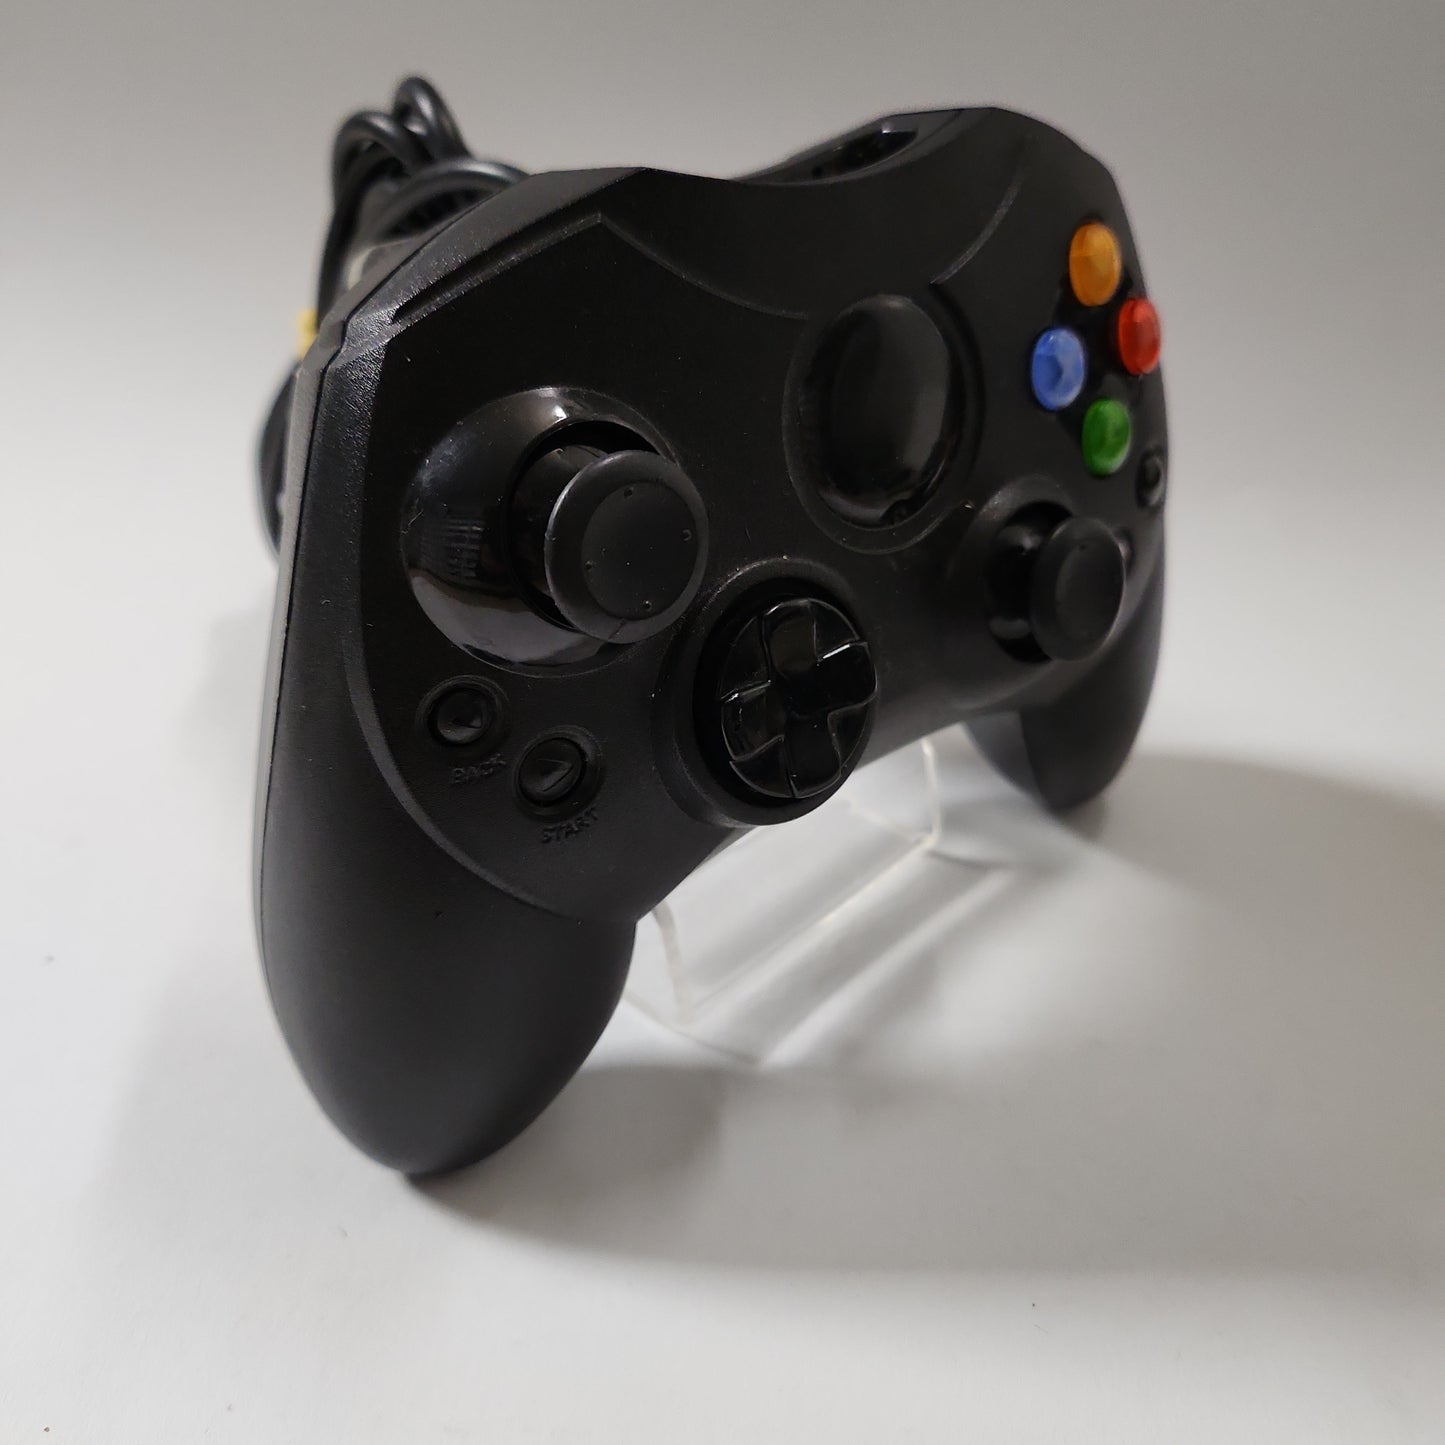 3rd Party Wired Controller Xbox Original